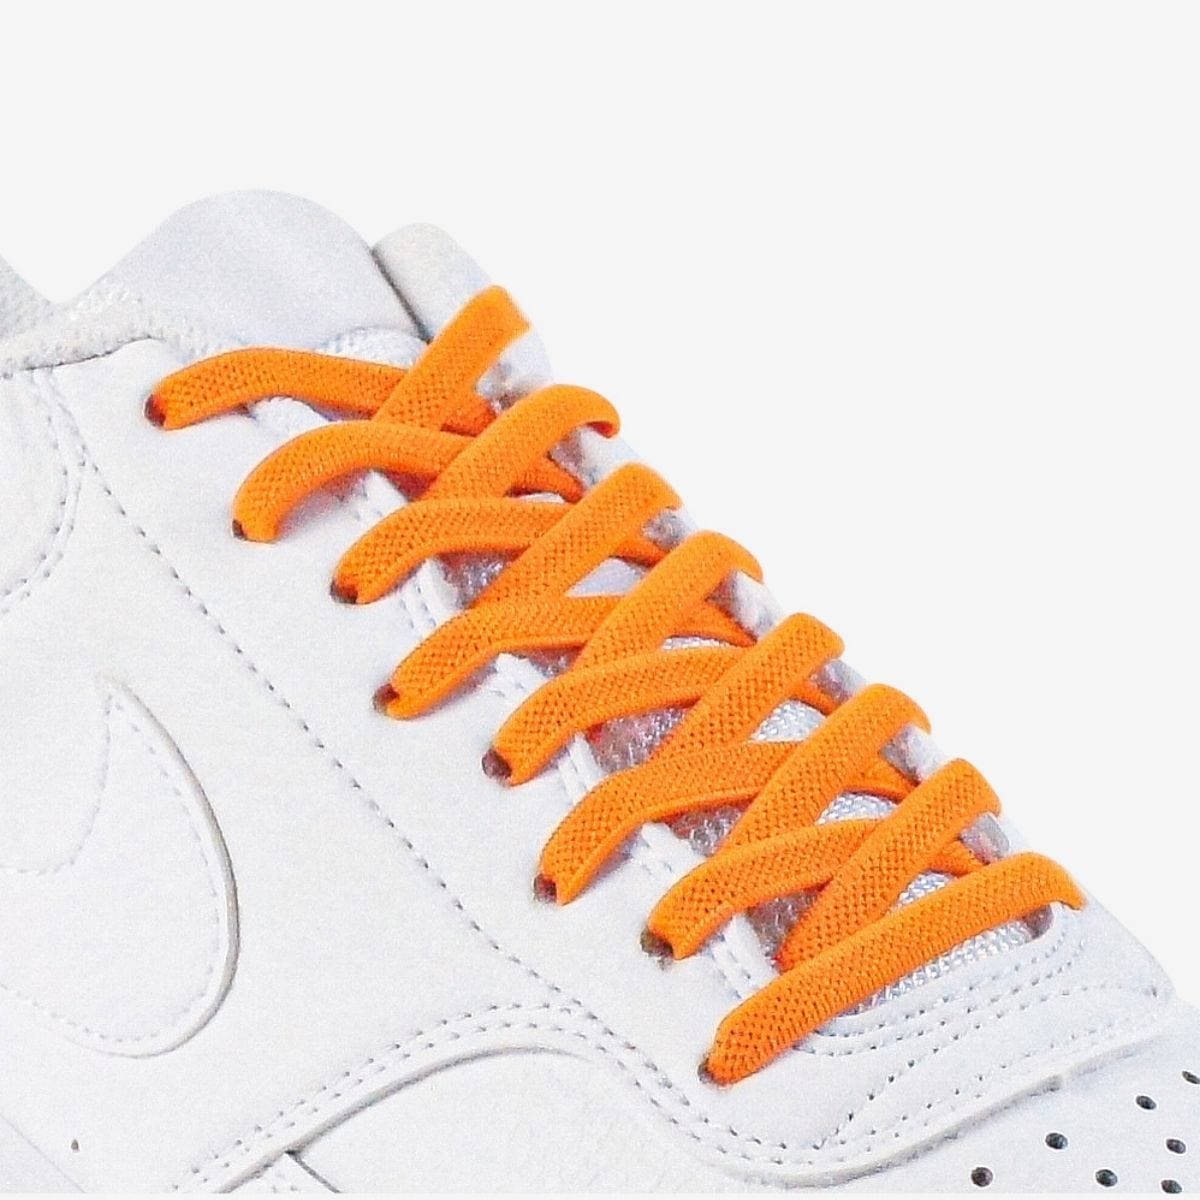 kids-no-tie-shoelaces-with-orange-laces-on-nike-white-sneakers-by-kicks-shoelaces